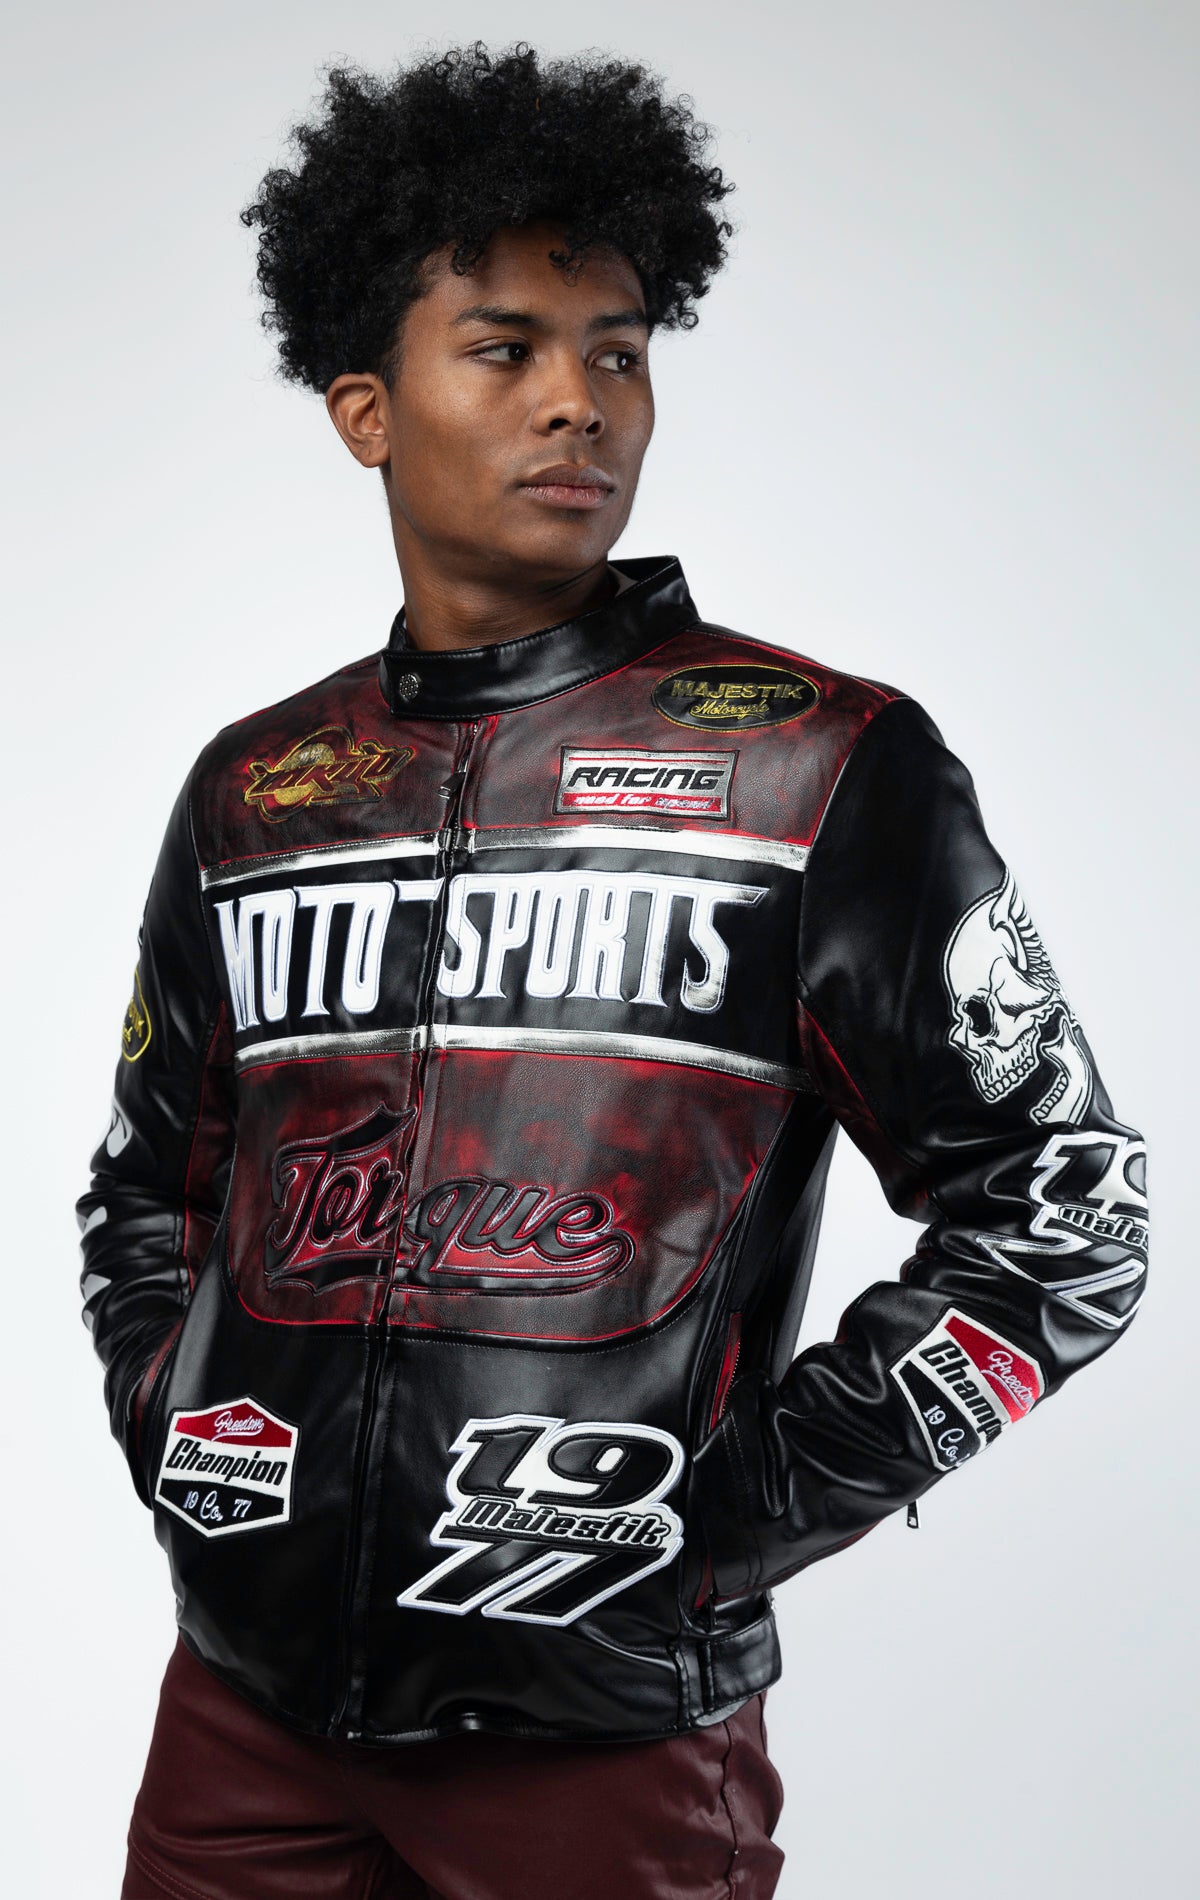 Black motor sport racing jacket with snap-button collar, full zip-up closure, multi-patch and embroidered details, zippered sleeves and pockets, and elasticized ribbed collar, cuffs, and waist. The interior includes a hanger loop, welt pocket, and faux leather finish for added convenience.